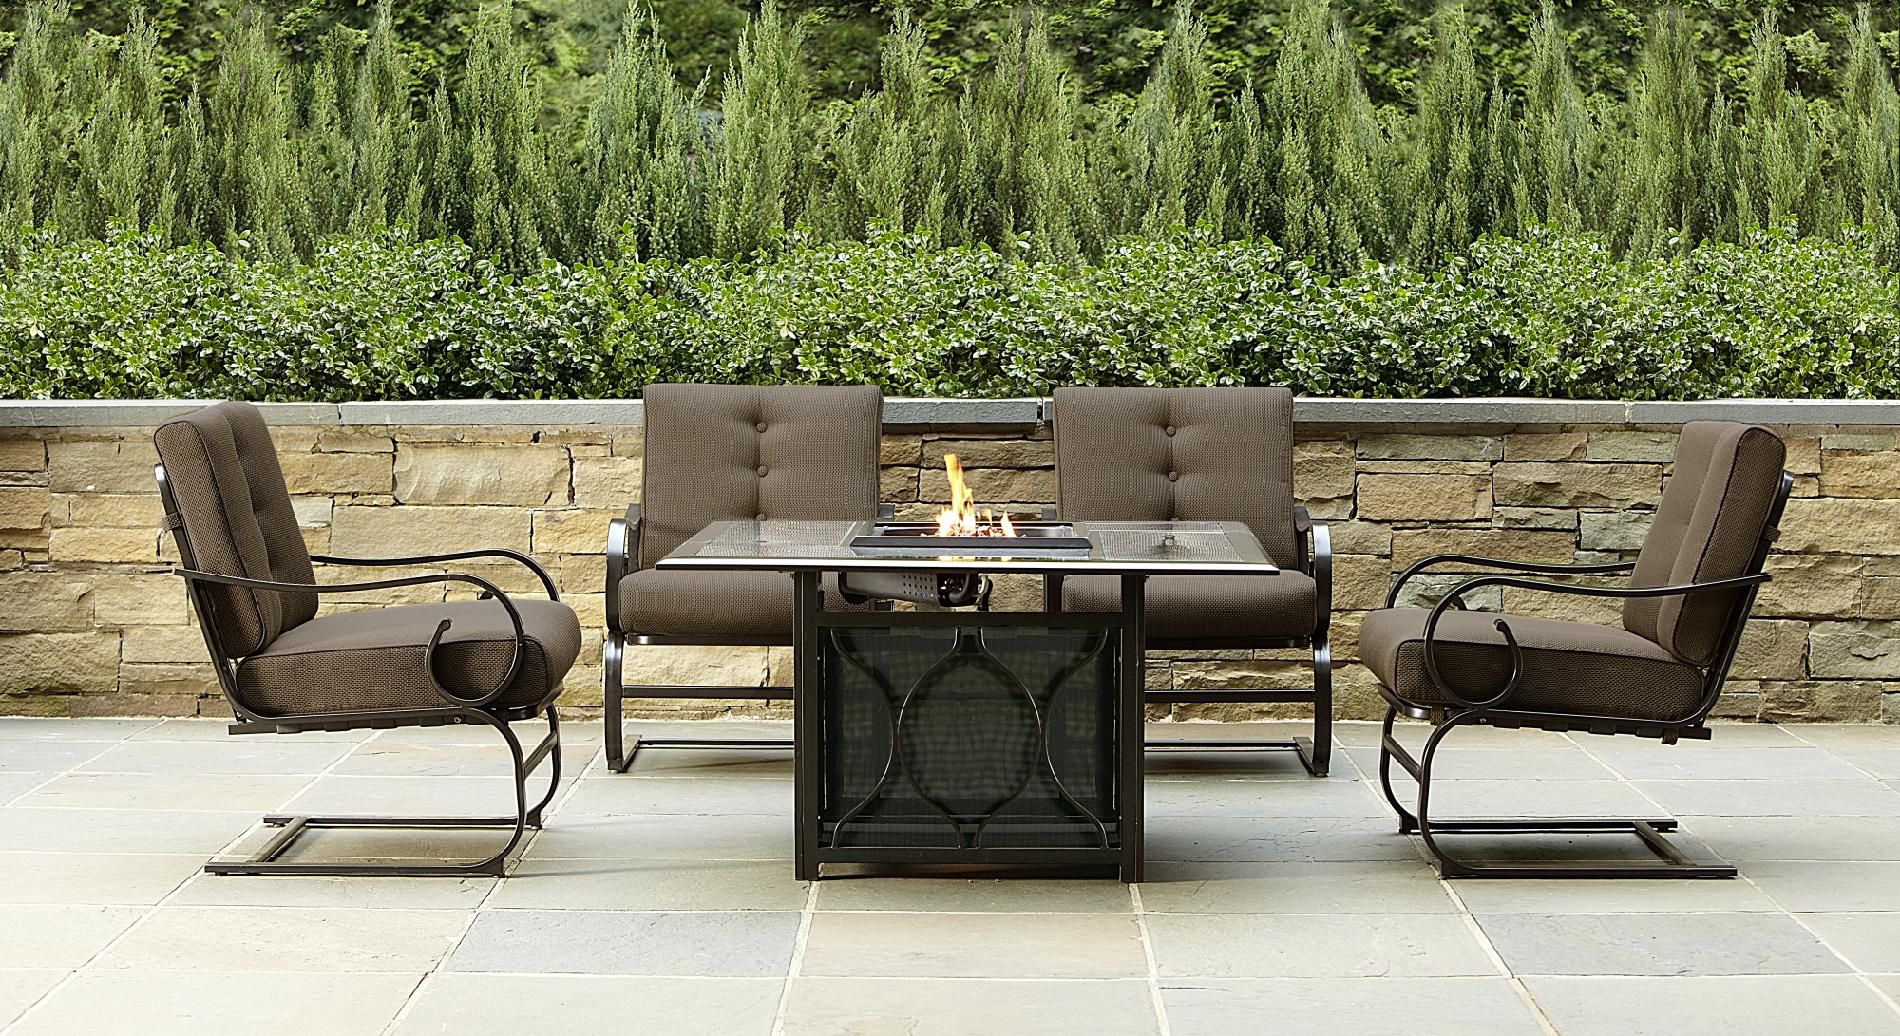 Grand Resort Smoky Hill 5pc Gas Firepit, Sears Outdoor Furniture With Fire Pit